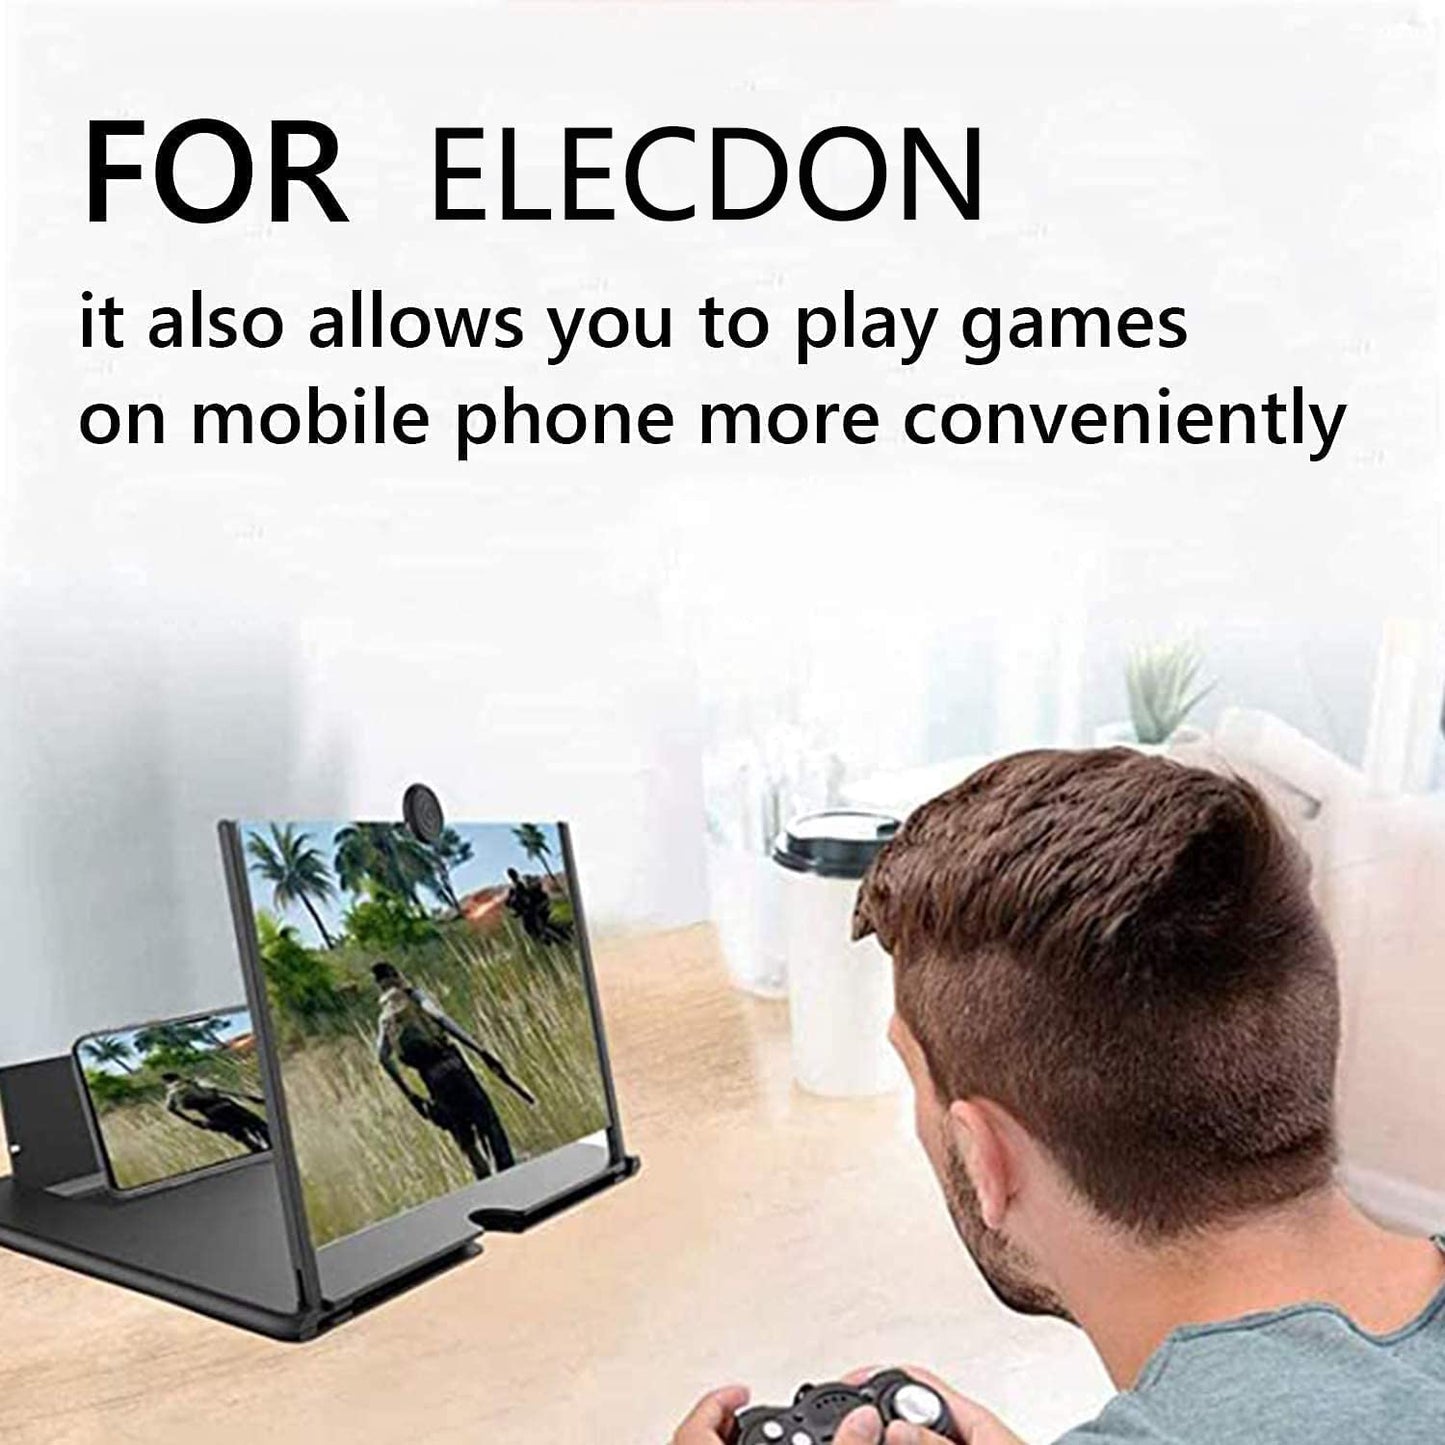 ELECDON Smartphone Phone Magnifier Screen, HD Mobile Phone Amplifier for Movies, Videos and Gaming, Stand 14 Inch 3D Foldable Amplifier, Portable Push Pull Design for All Smartphone-Black